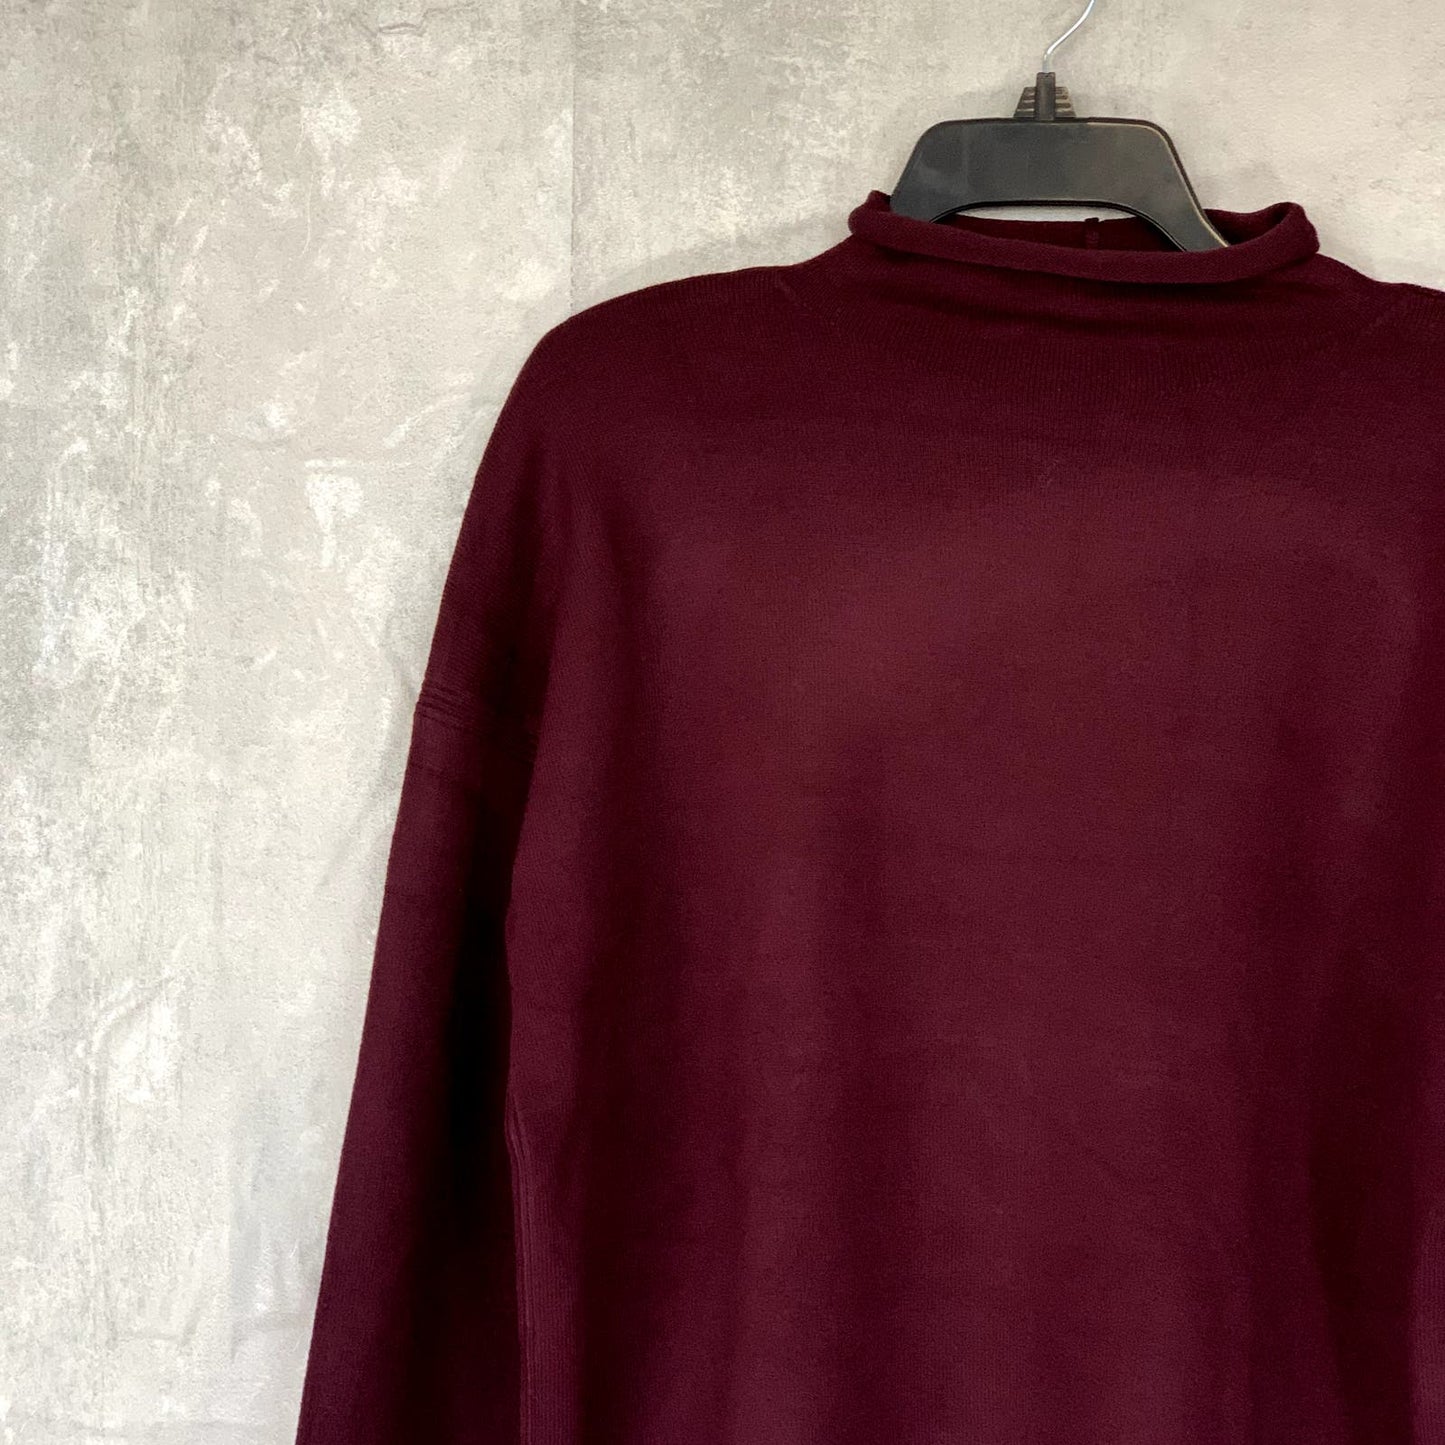 FRENCH CONNECTION Wine Turtleneck Long Sleeve Pullover Sweater SZ XS